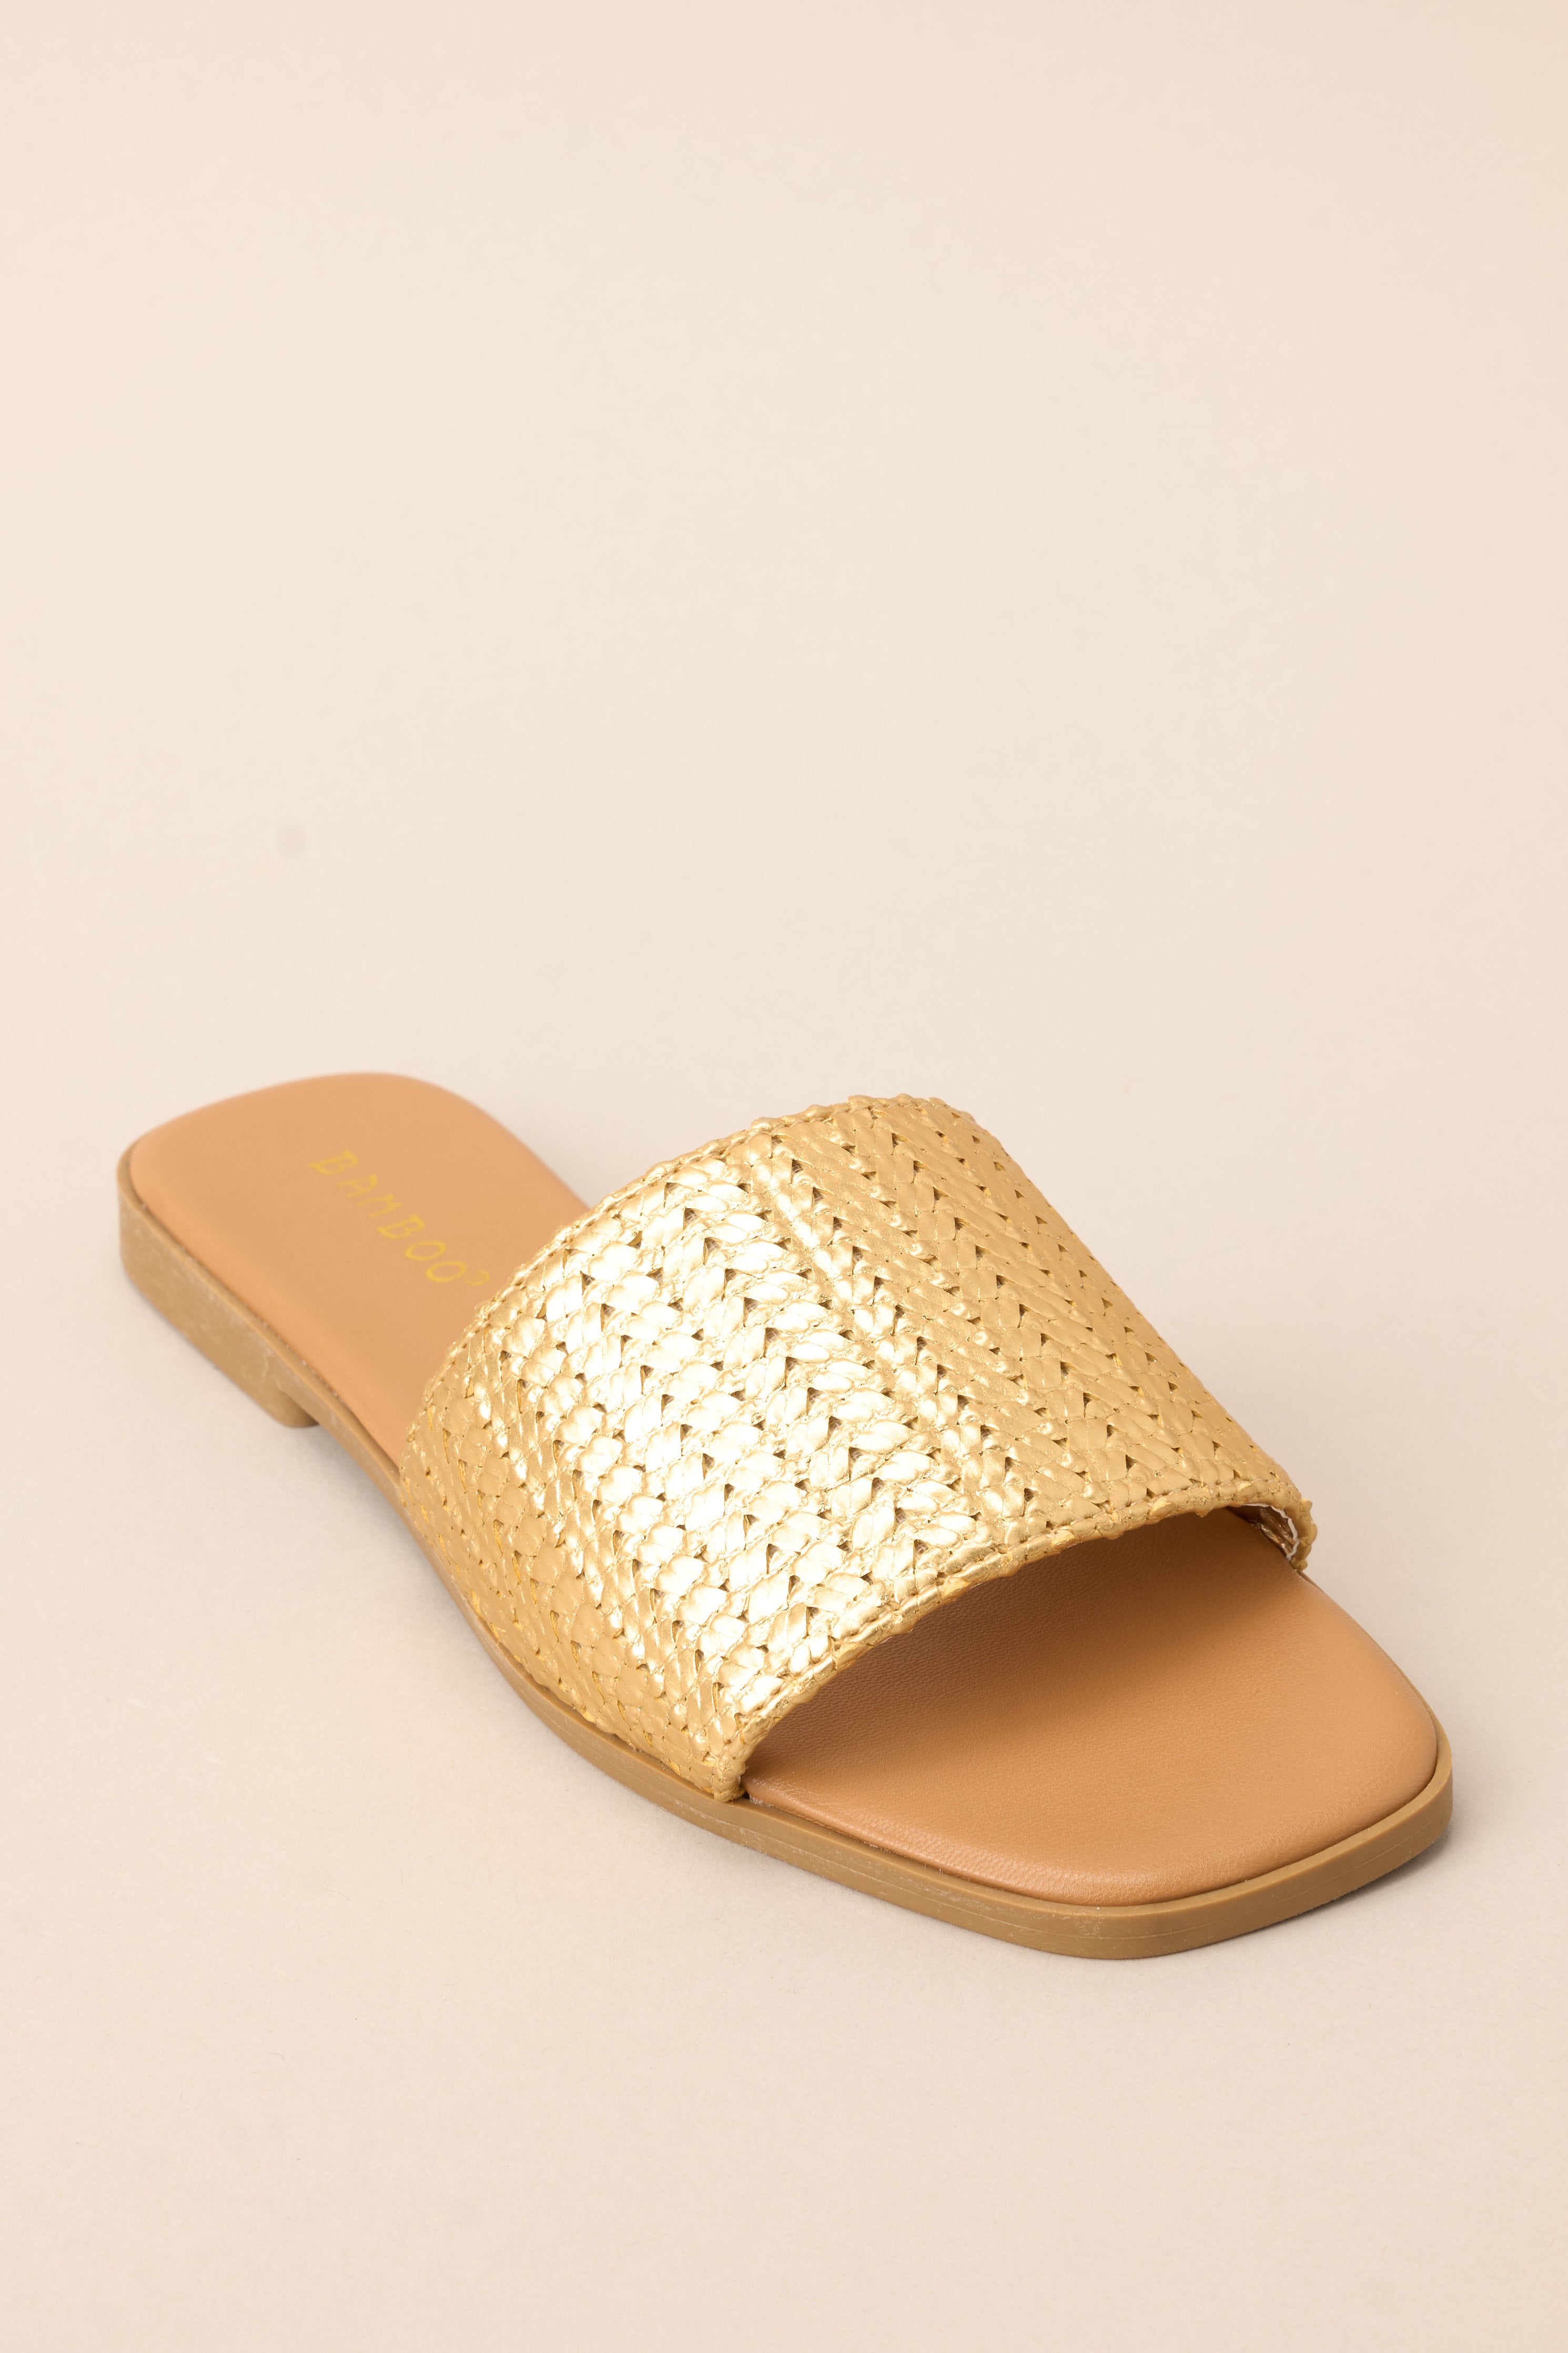 Angled front view of these sandals that feature a gold detailed strap over the foot and a slip-on style.